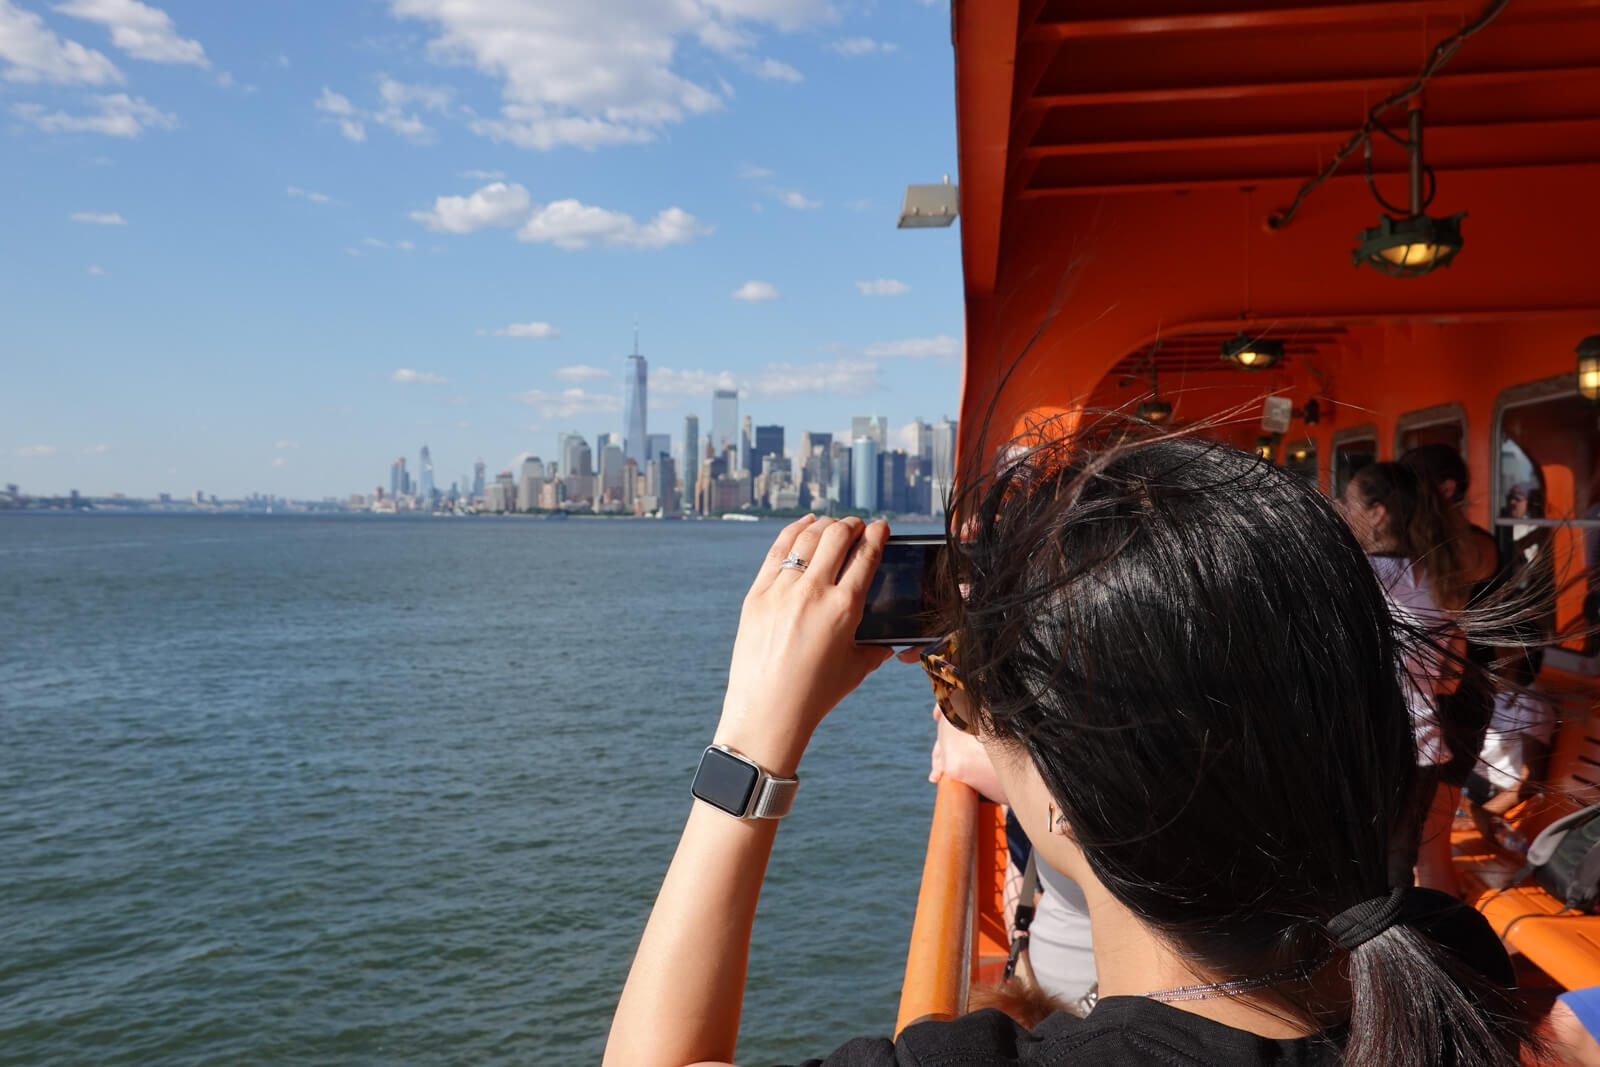 The back of a woman’s head as she takes a photo with her smartphone from a ferry. In the distance is a city with high-rise buildings